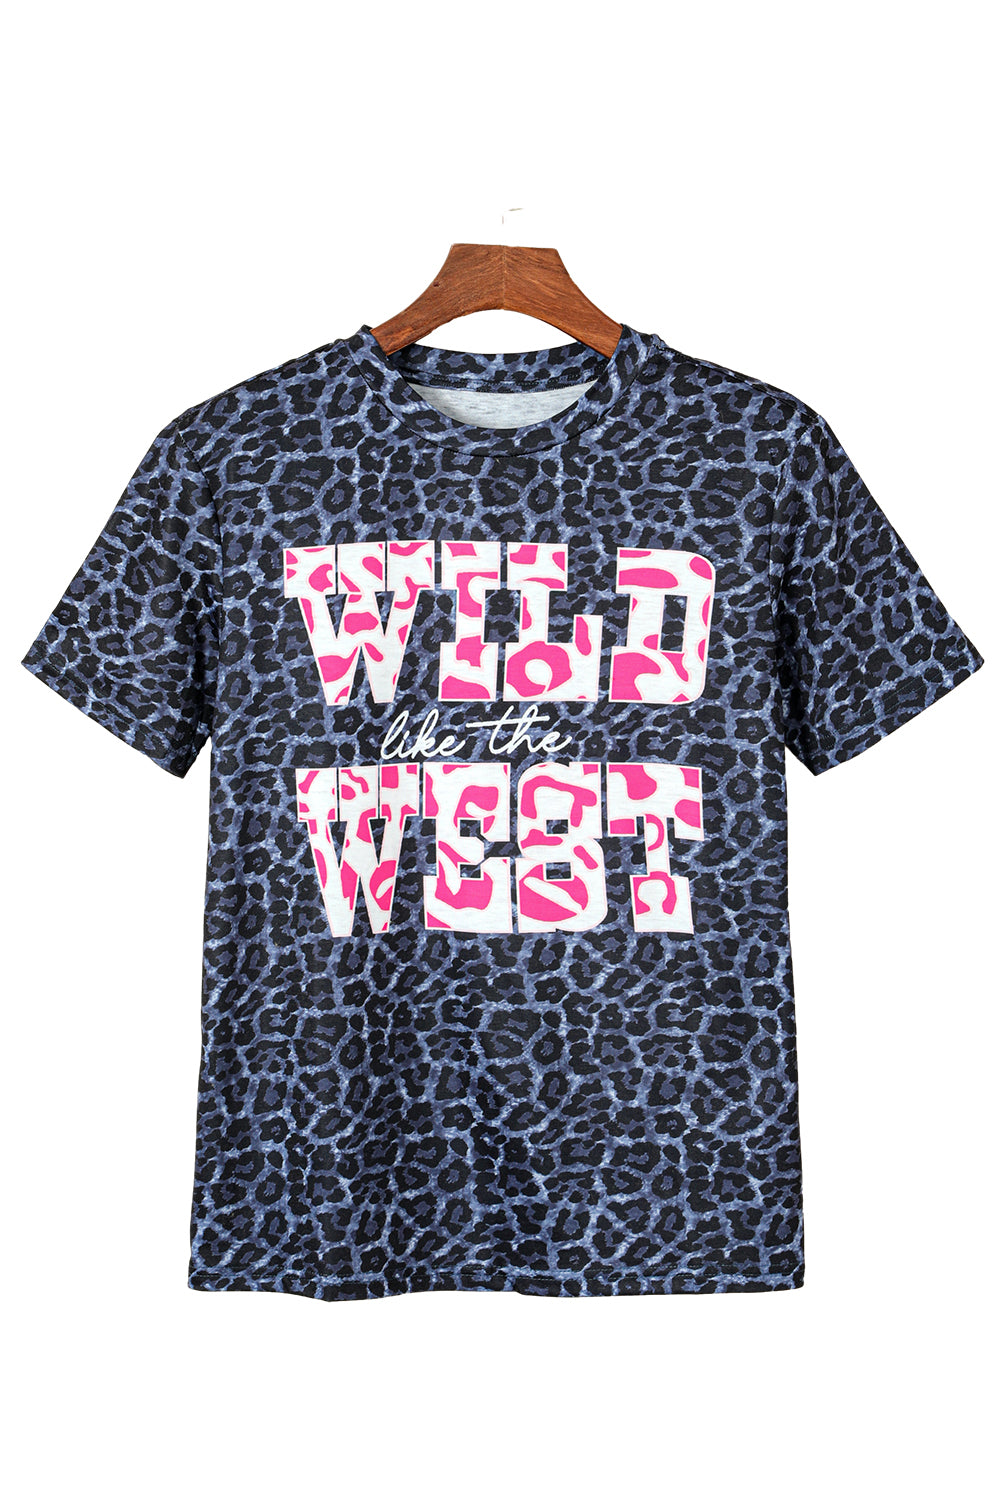 Black Leopard WILD like the WEST Letter Print Graphic Tee